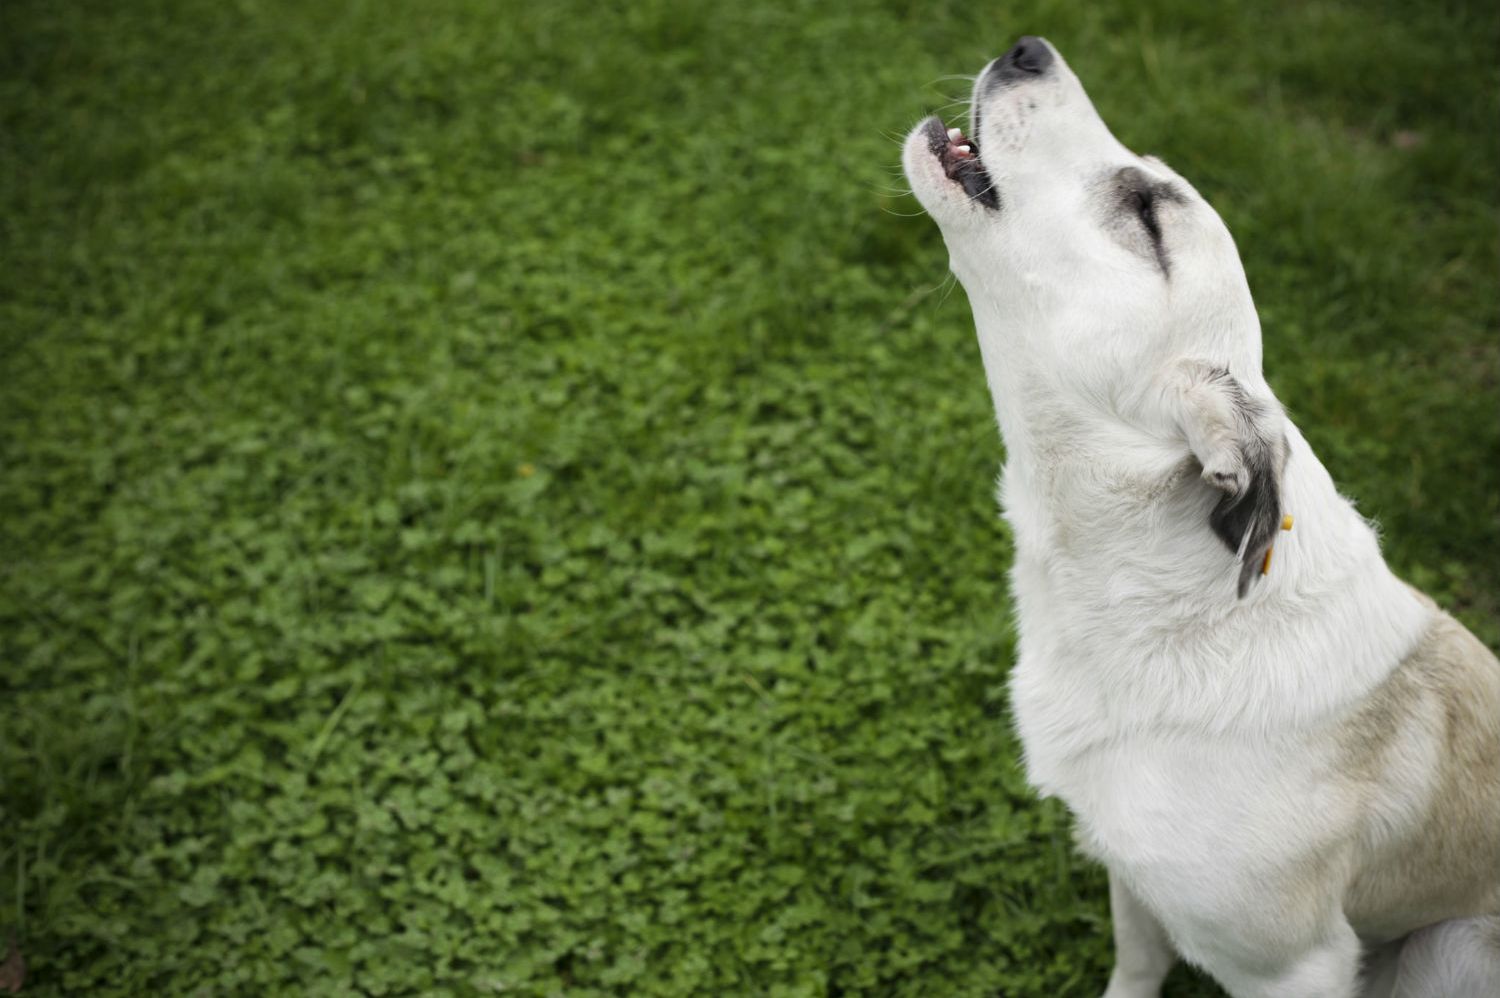 Why do dogs howl at ambulance sirens